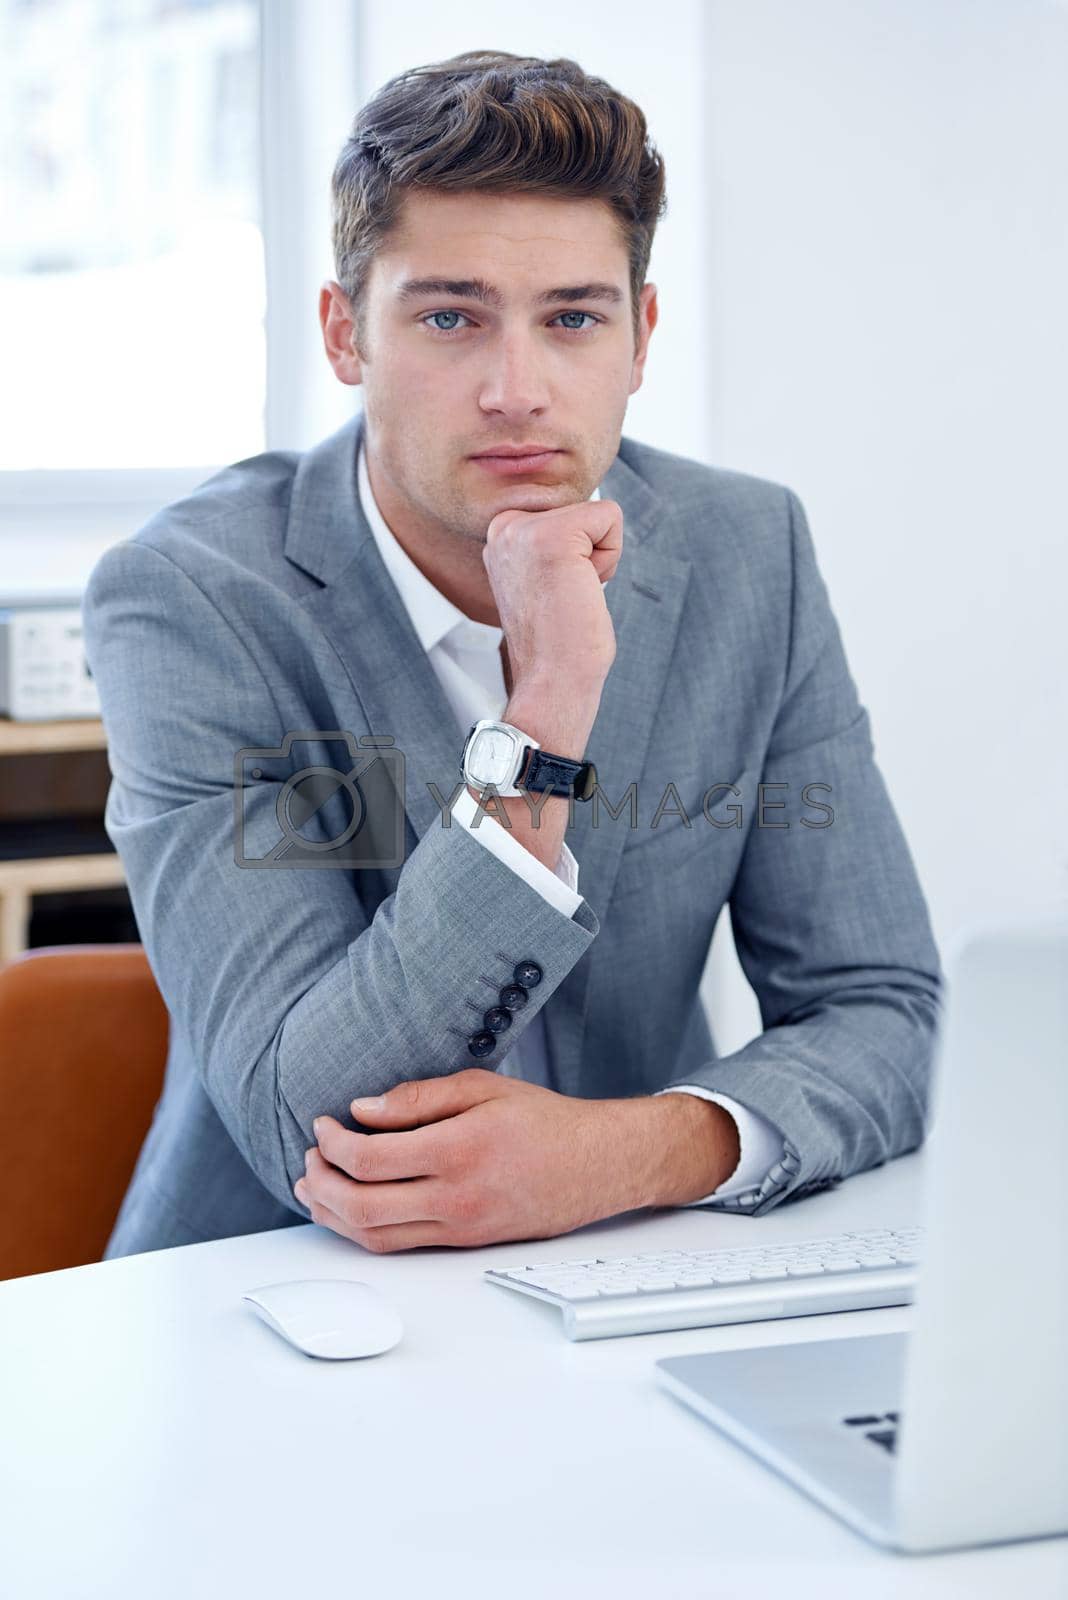 Royalty free image of Hes got plenty of career aspirations. A thoughtful young businessman sitting at his desk. by YuriArcurs